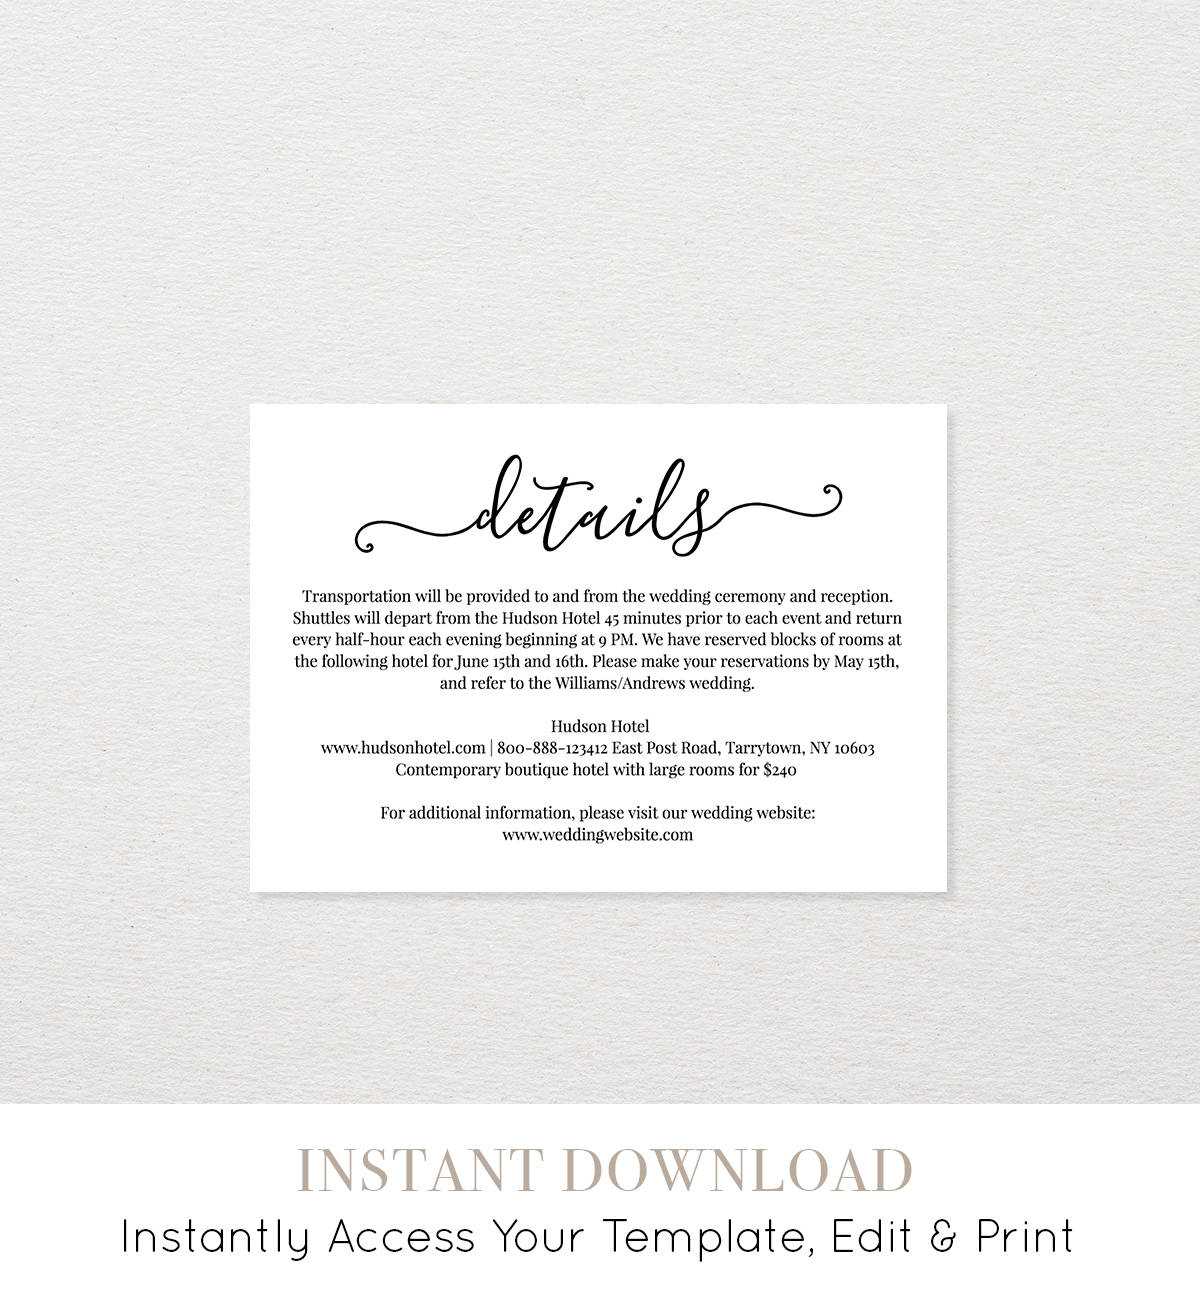 Wedding Details Card Template, Printable Accommodations Throughout Wedding Hotel Information Card Template